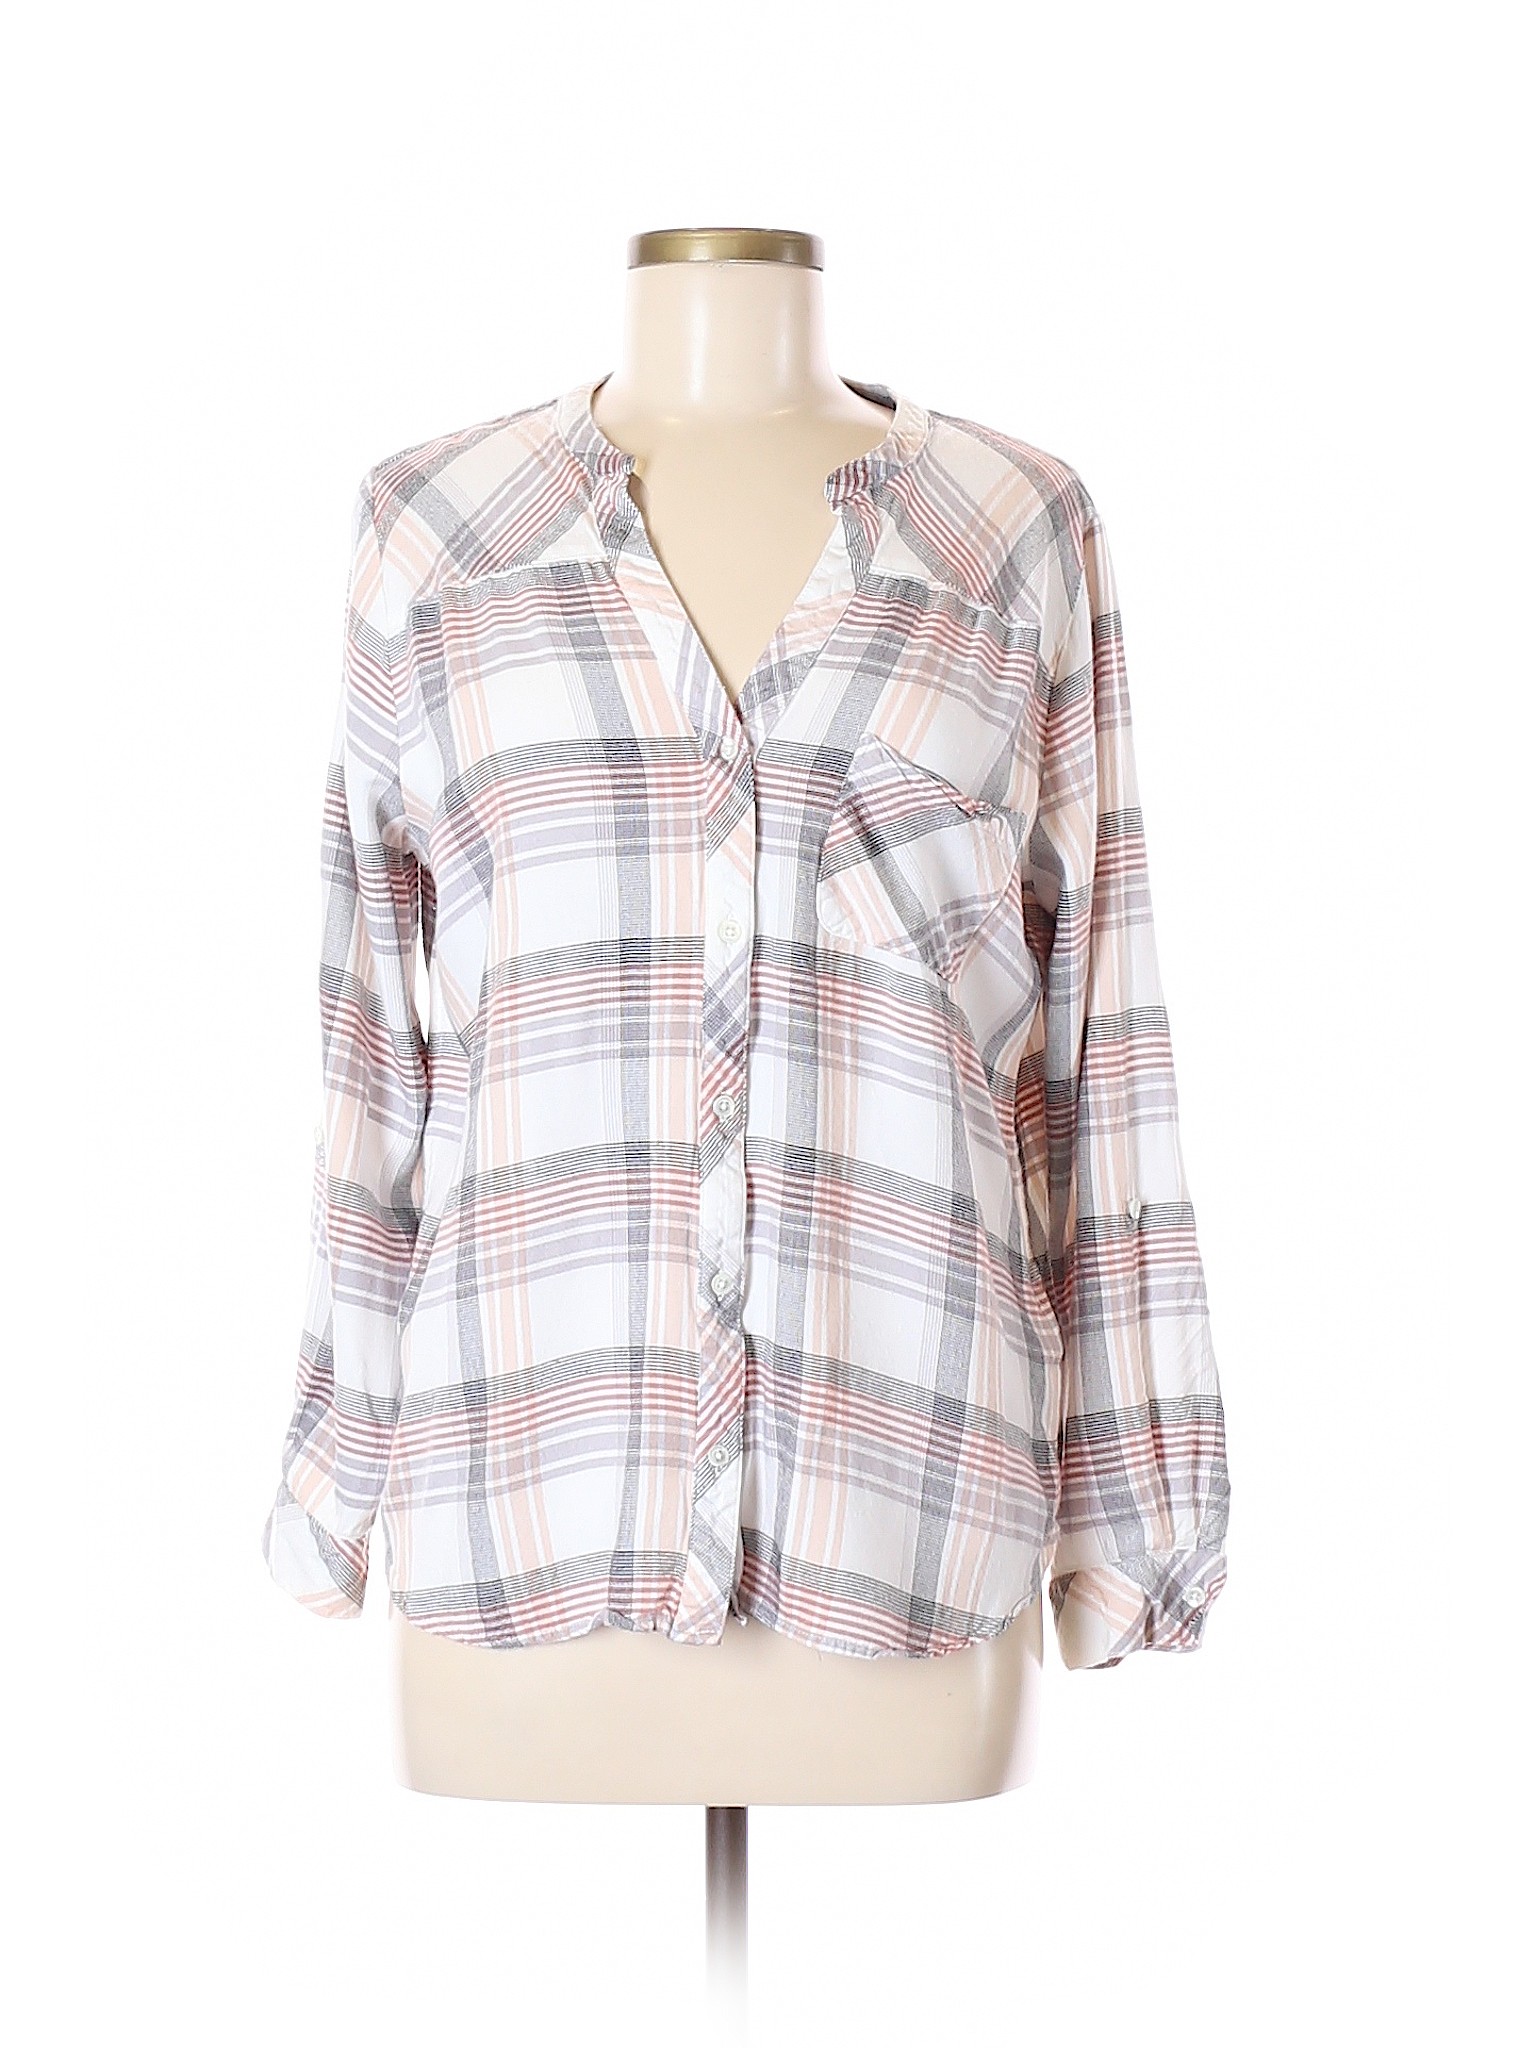 Soft Joie 100% Rayon Tan Long Sleeve Button-Down Shirt Size M - 81% off ...